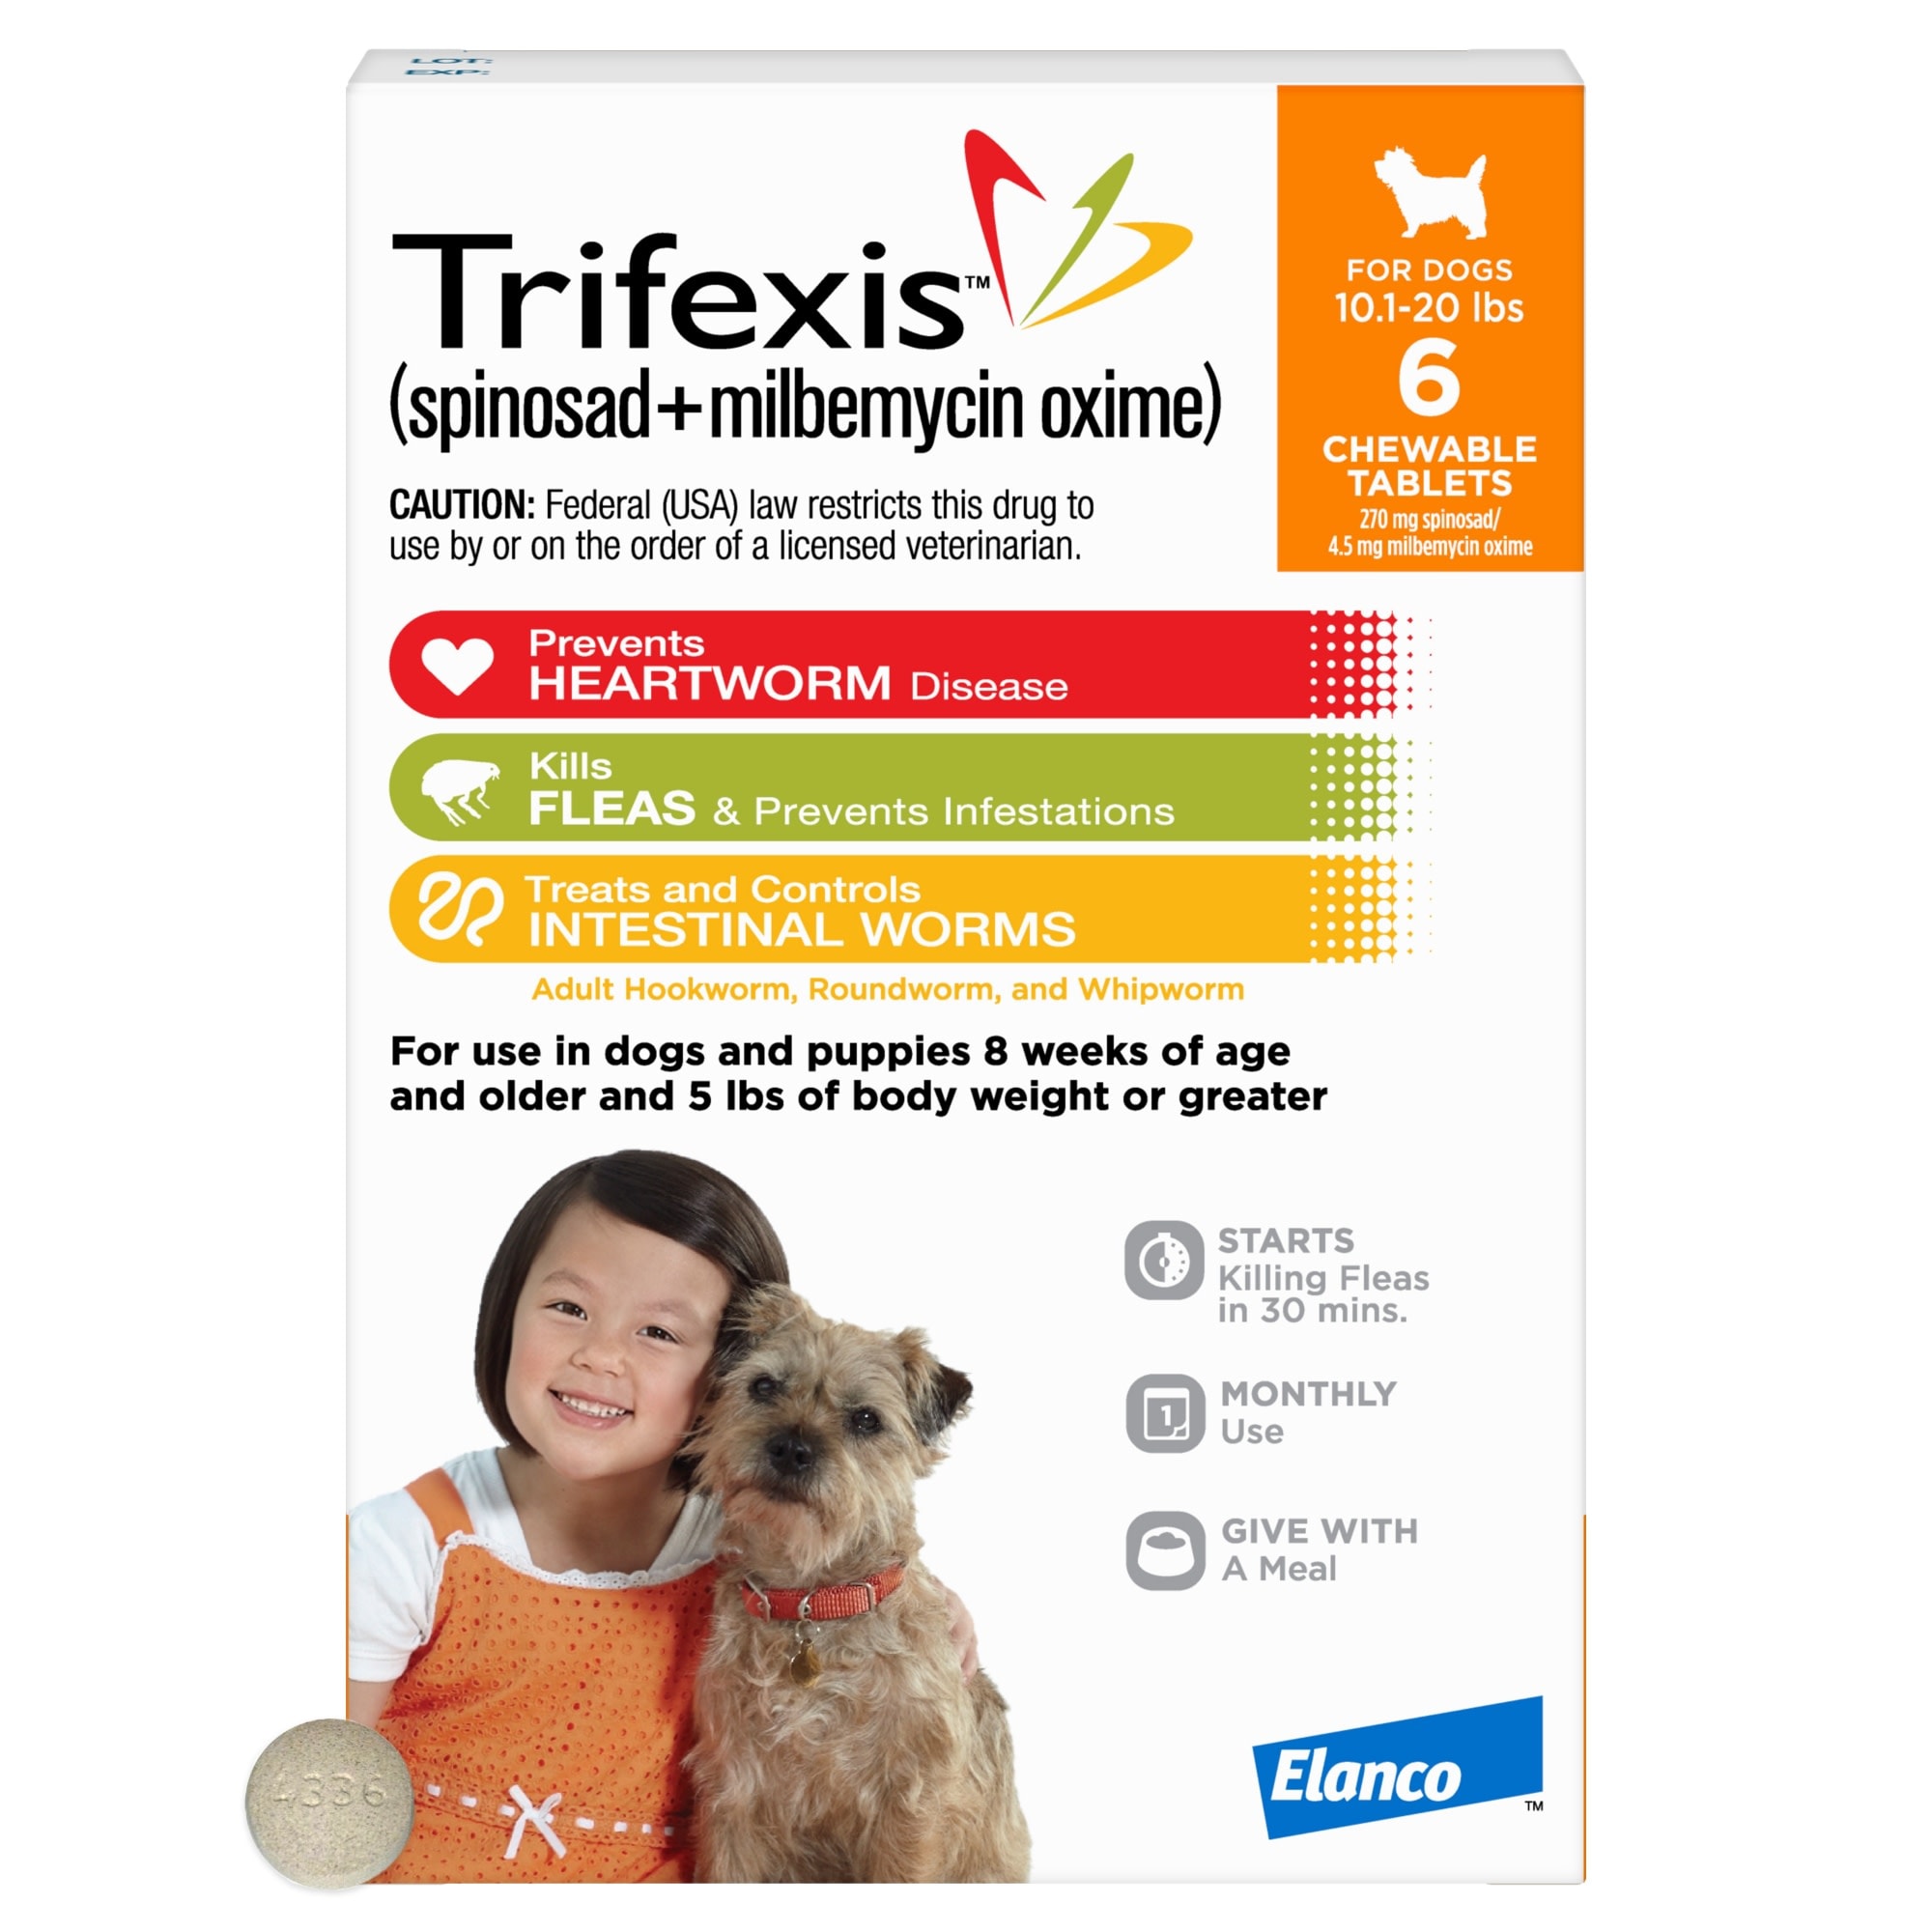 my dog is on trifexis and still has fleas